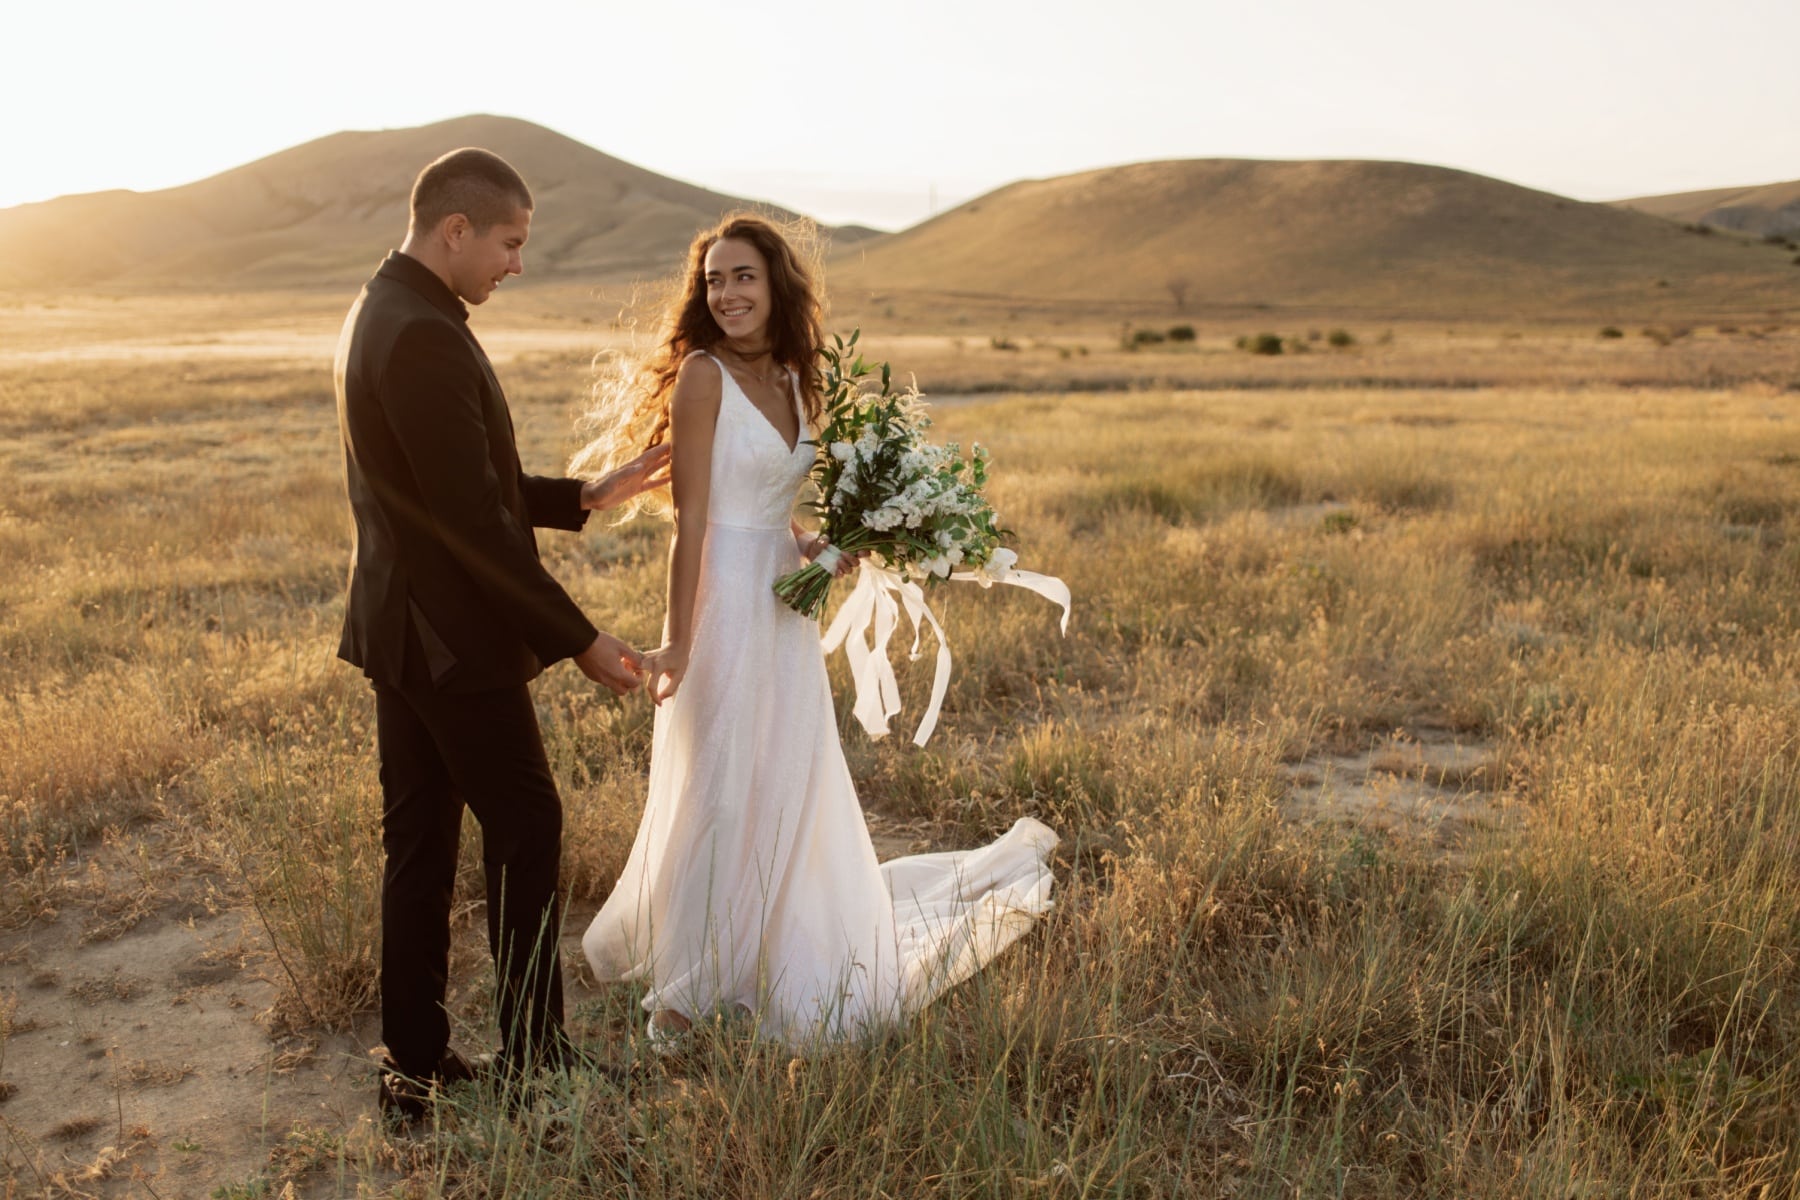 A bride and groom stand in a grassy field with hills behind them.